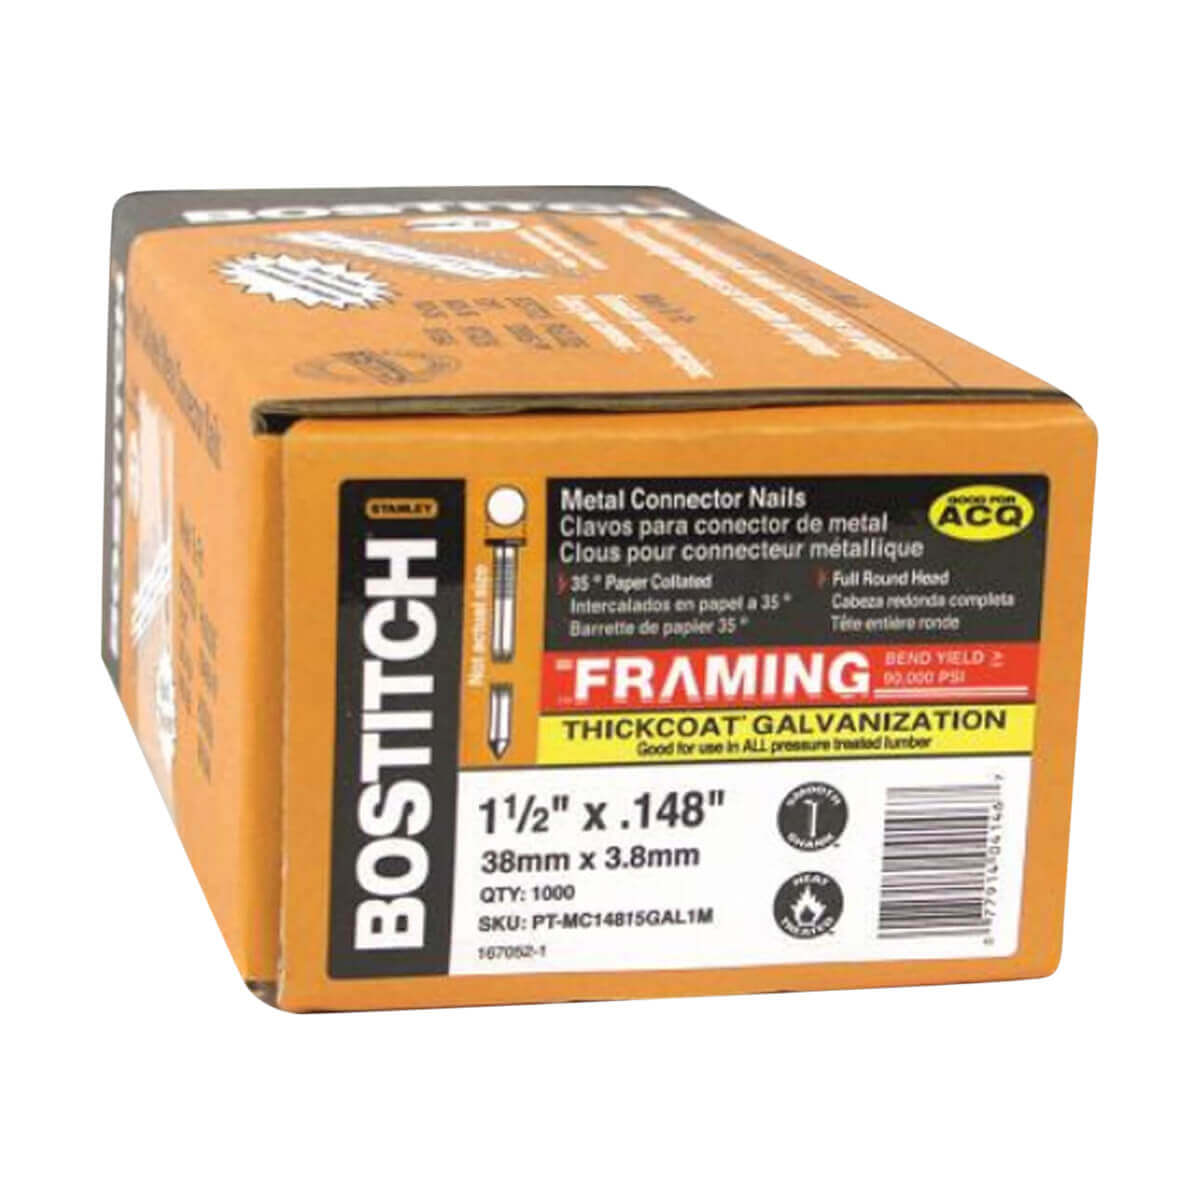 Bostitch Metal Connector Nails - 1-1/2-in x .148 35° - Standard - Box of 1000